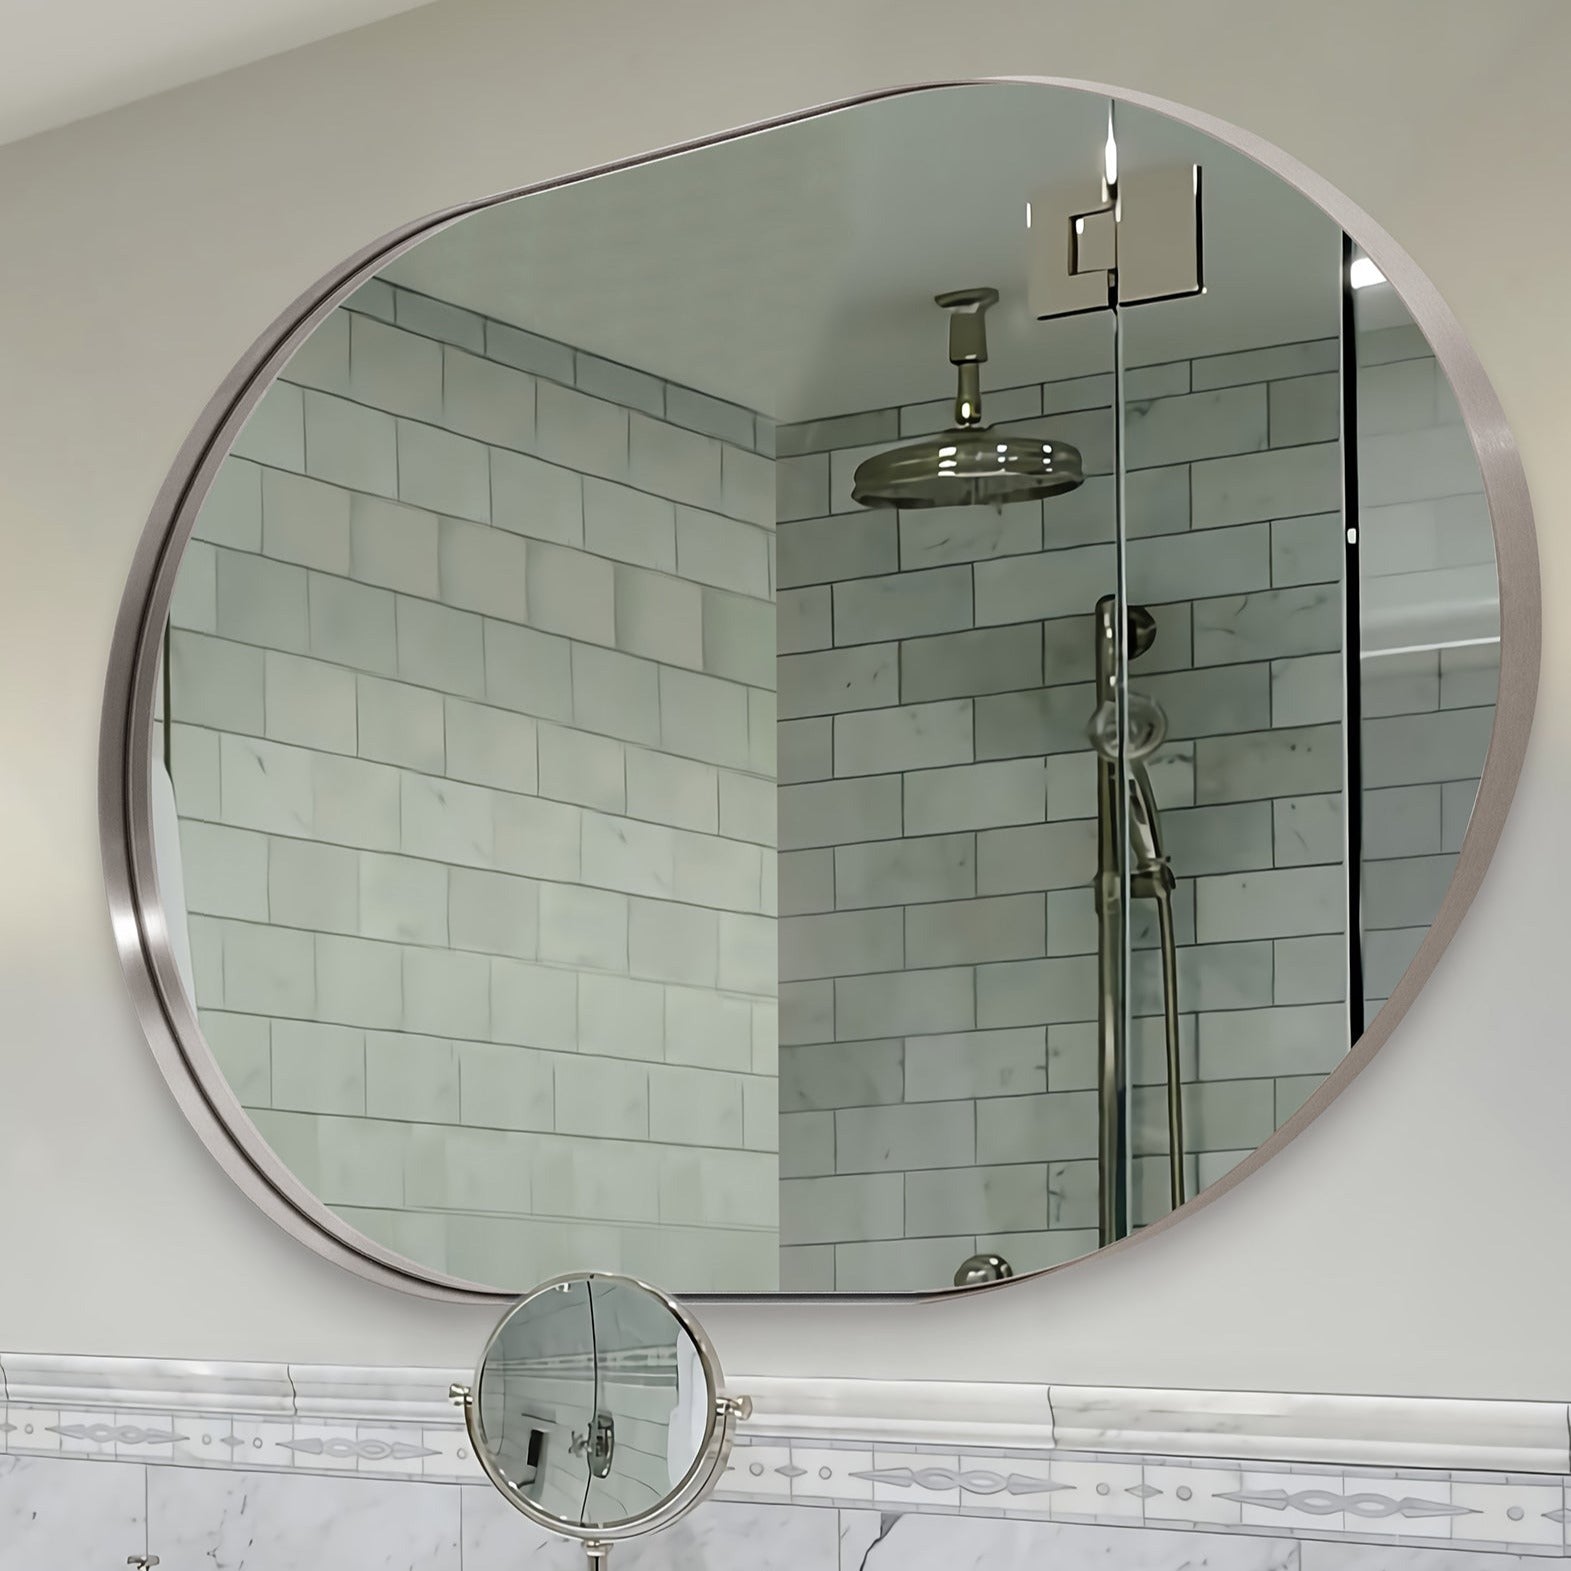 Contemporary Pill / Capsule Shaped Bathroom Wall Mirrors | Stainless Steel Framed